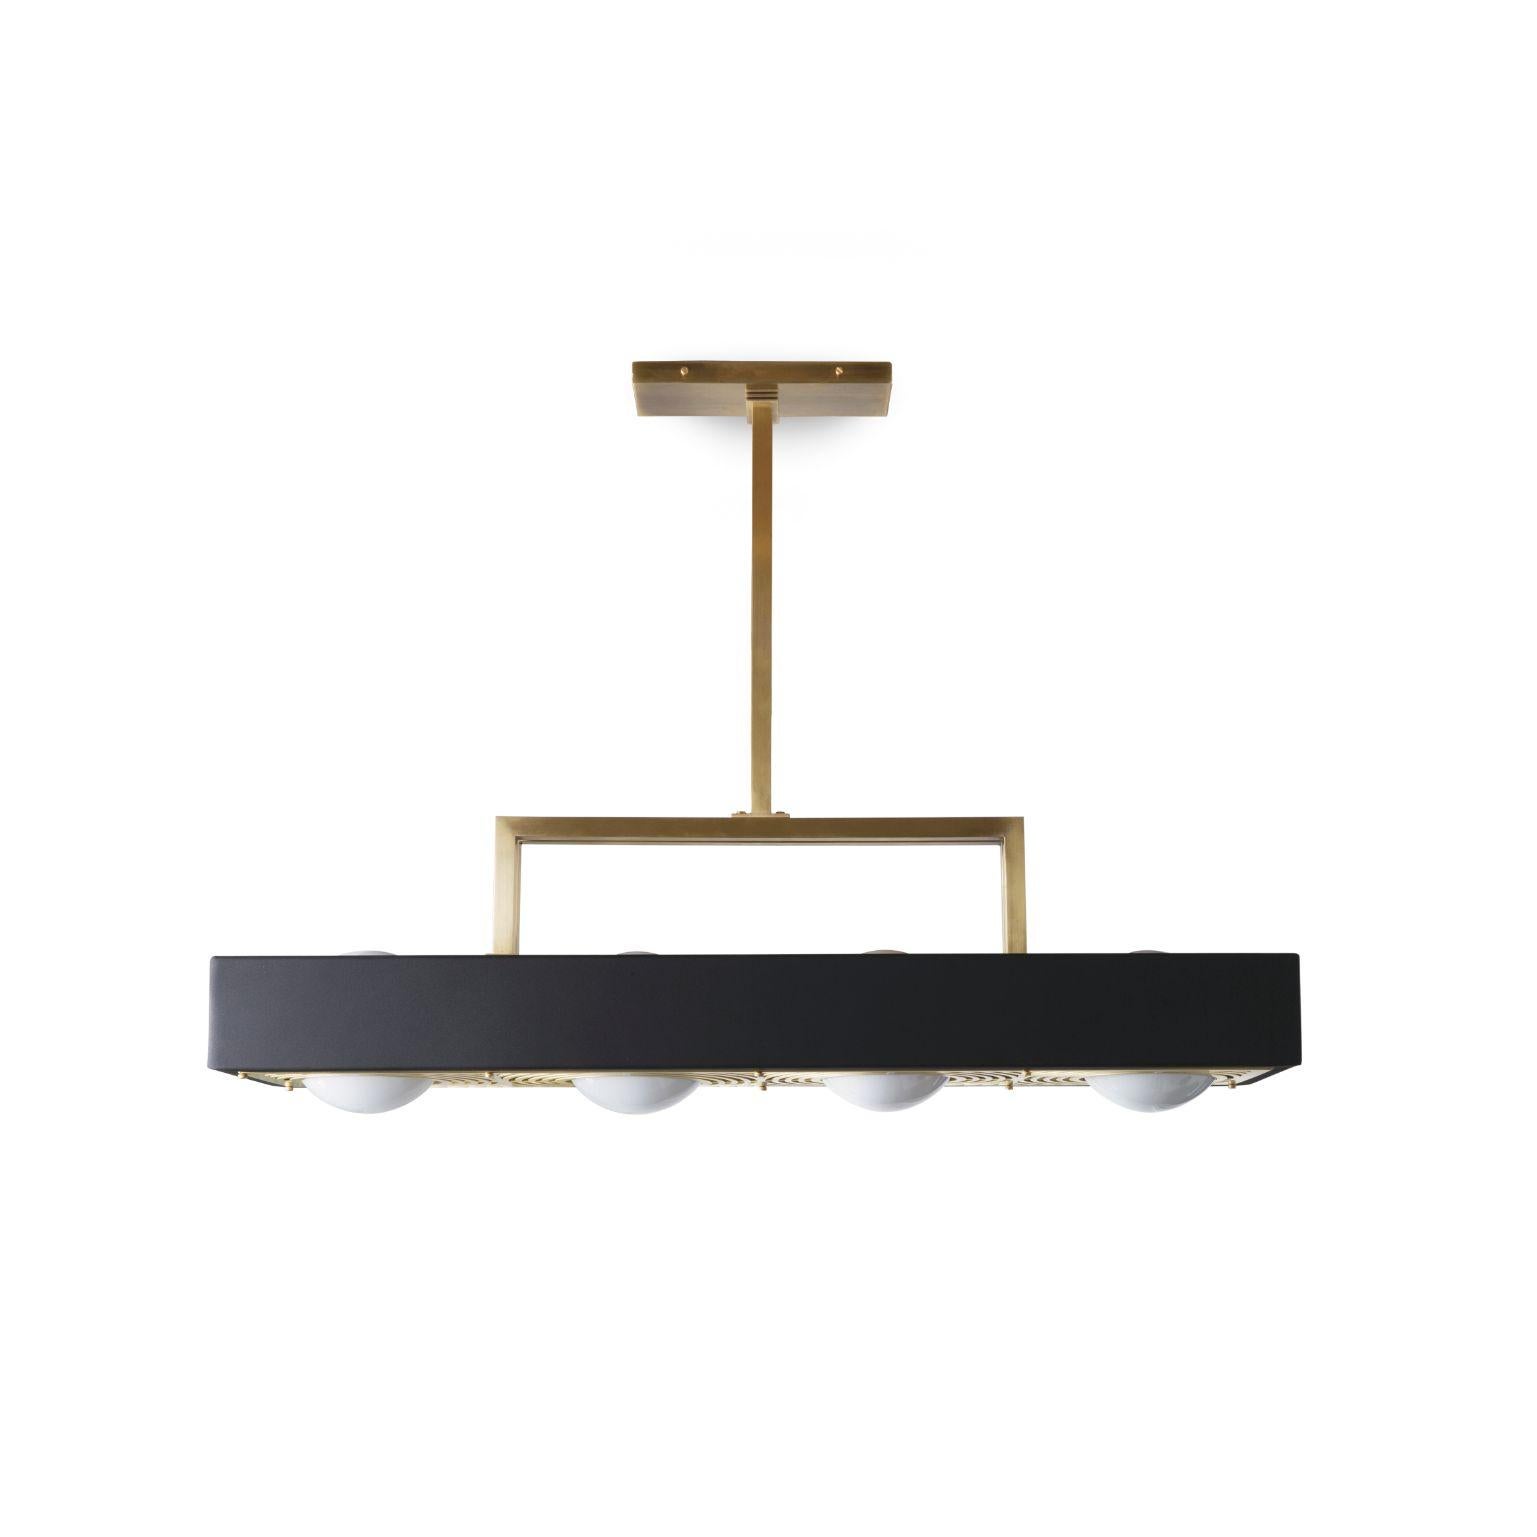 Kernel pendant light - black by Bert Frank
Dimensions: 18.5 (only lamp) x 80 x 20 cm
Materials: Brass, steel

Also available: in blue and white

When Adam Yeats and Robbie Llewellyn founded Bert Frank in 2013 it was a meeting of minds and the